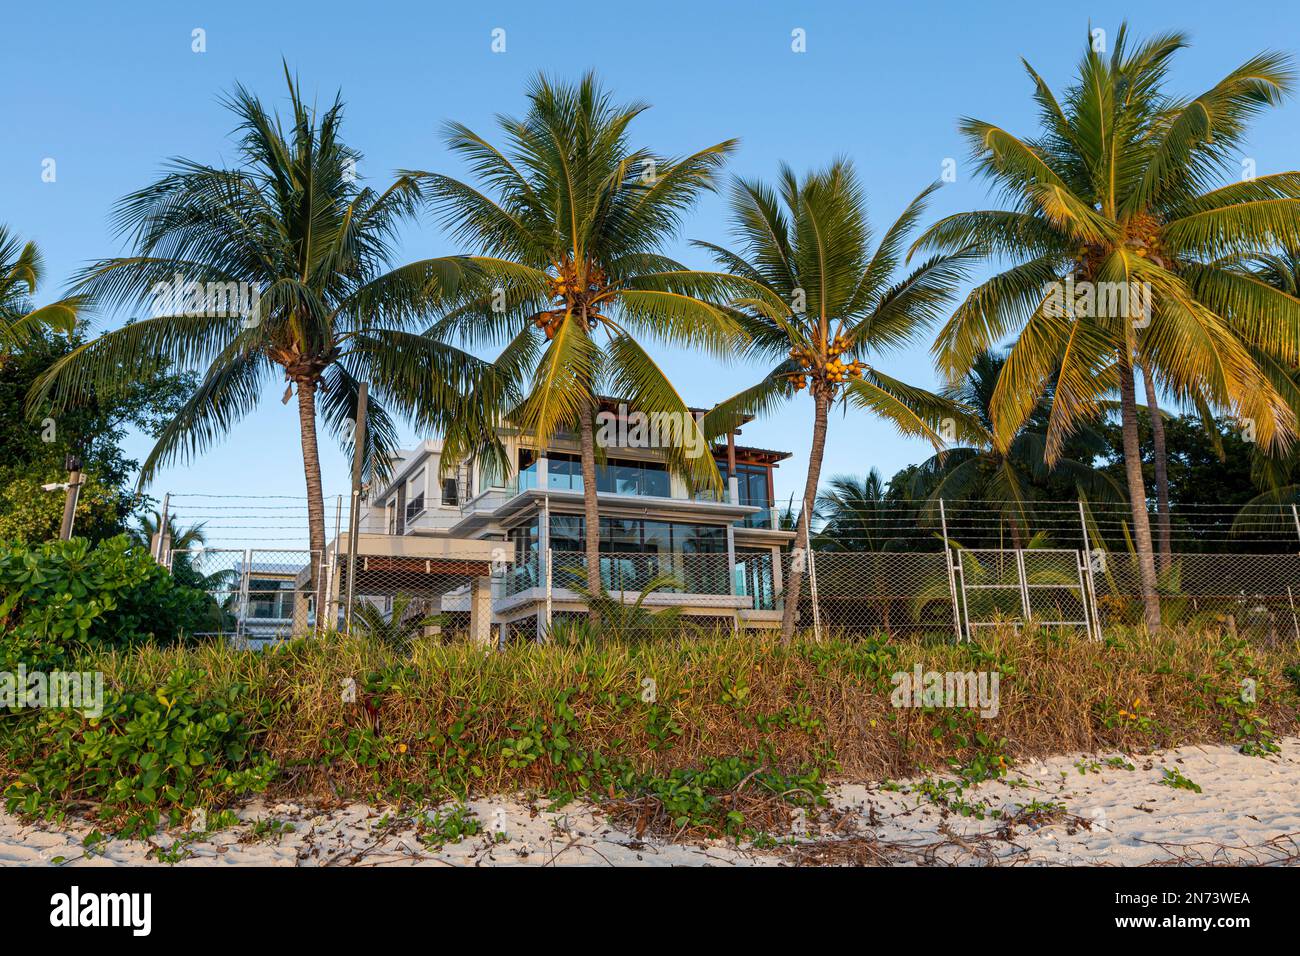 Some houses at the beach of flic en flac at mauritius island, africa Stock Photo